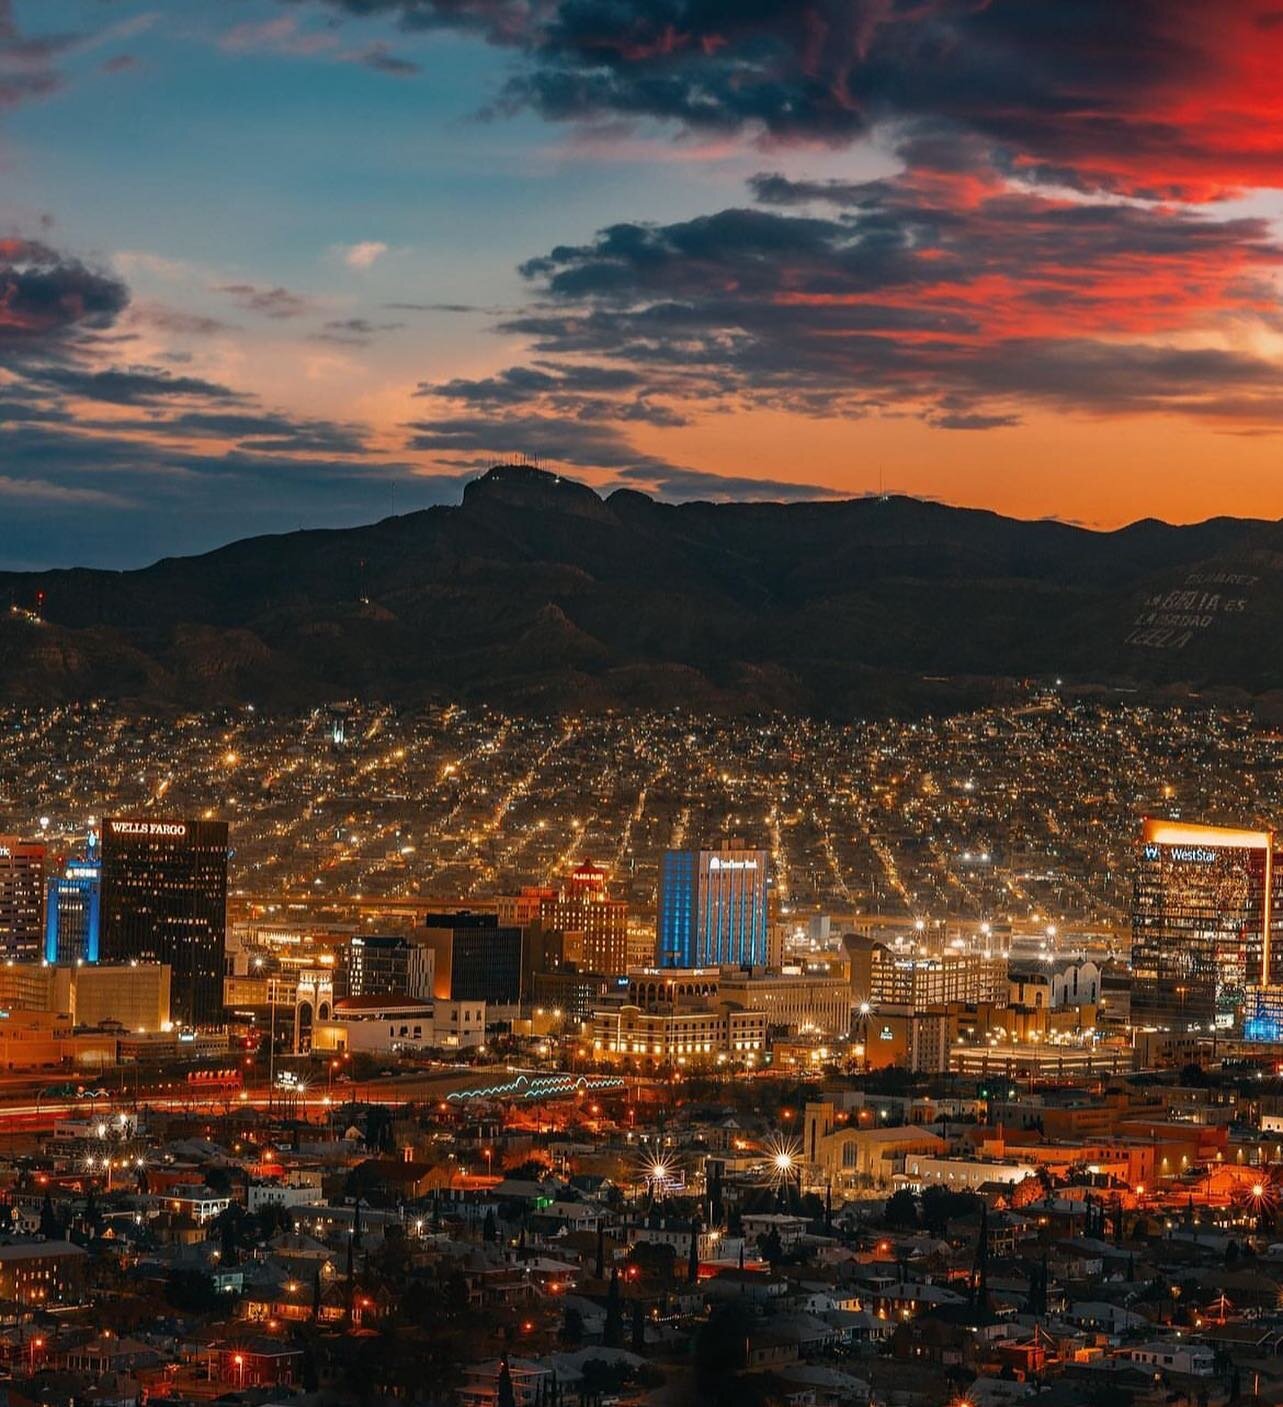 📸 @christianchurches | Embracing the night owl life amidst this scorching heat! 🌙💫 Absolutely in love with our beautiful city, El Paso. Let's come together to support city representatives who prioritize the environment, public health, preservation